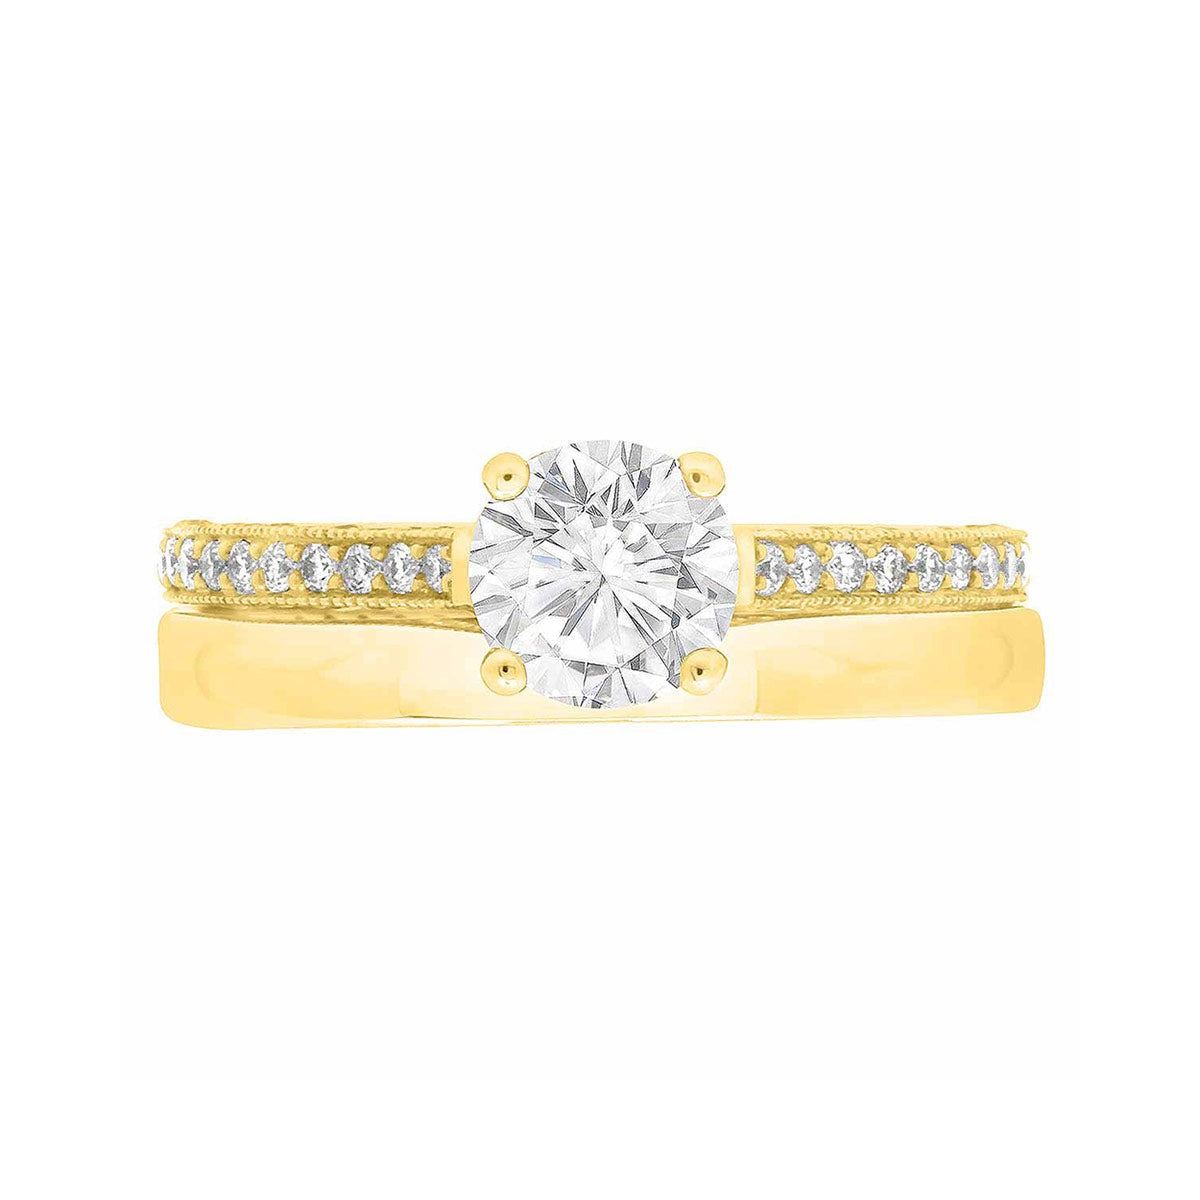 Thin Band Solitaire Ring with diamonds on sidewalls in yellow gold pictured with a matching plain gold wedding band